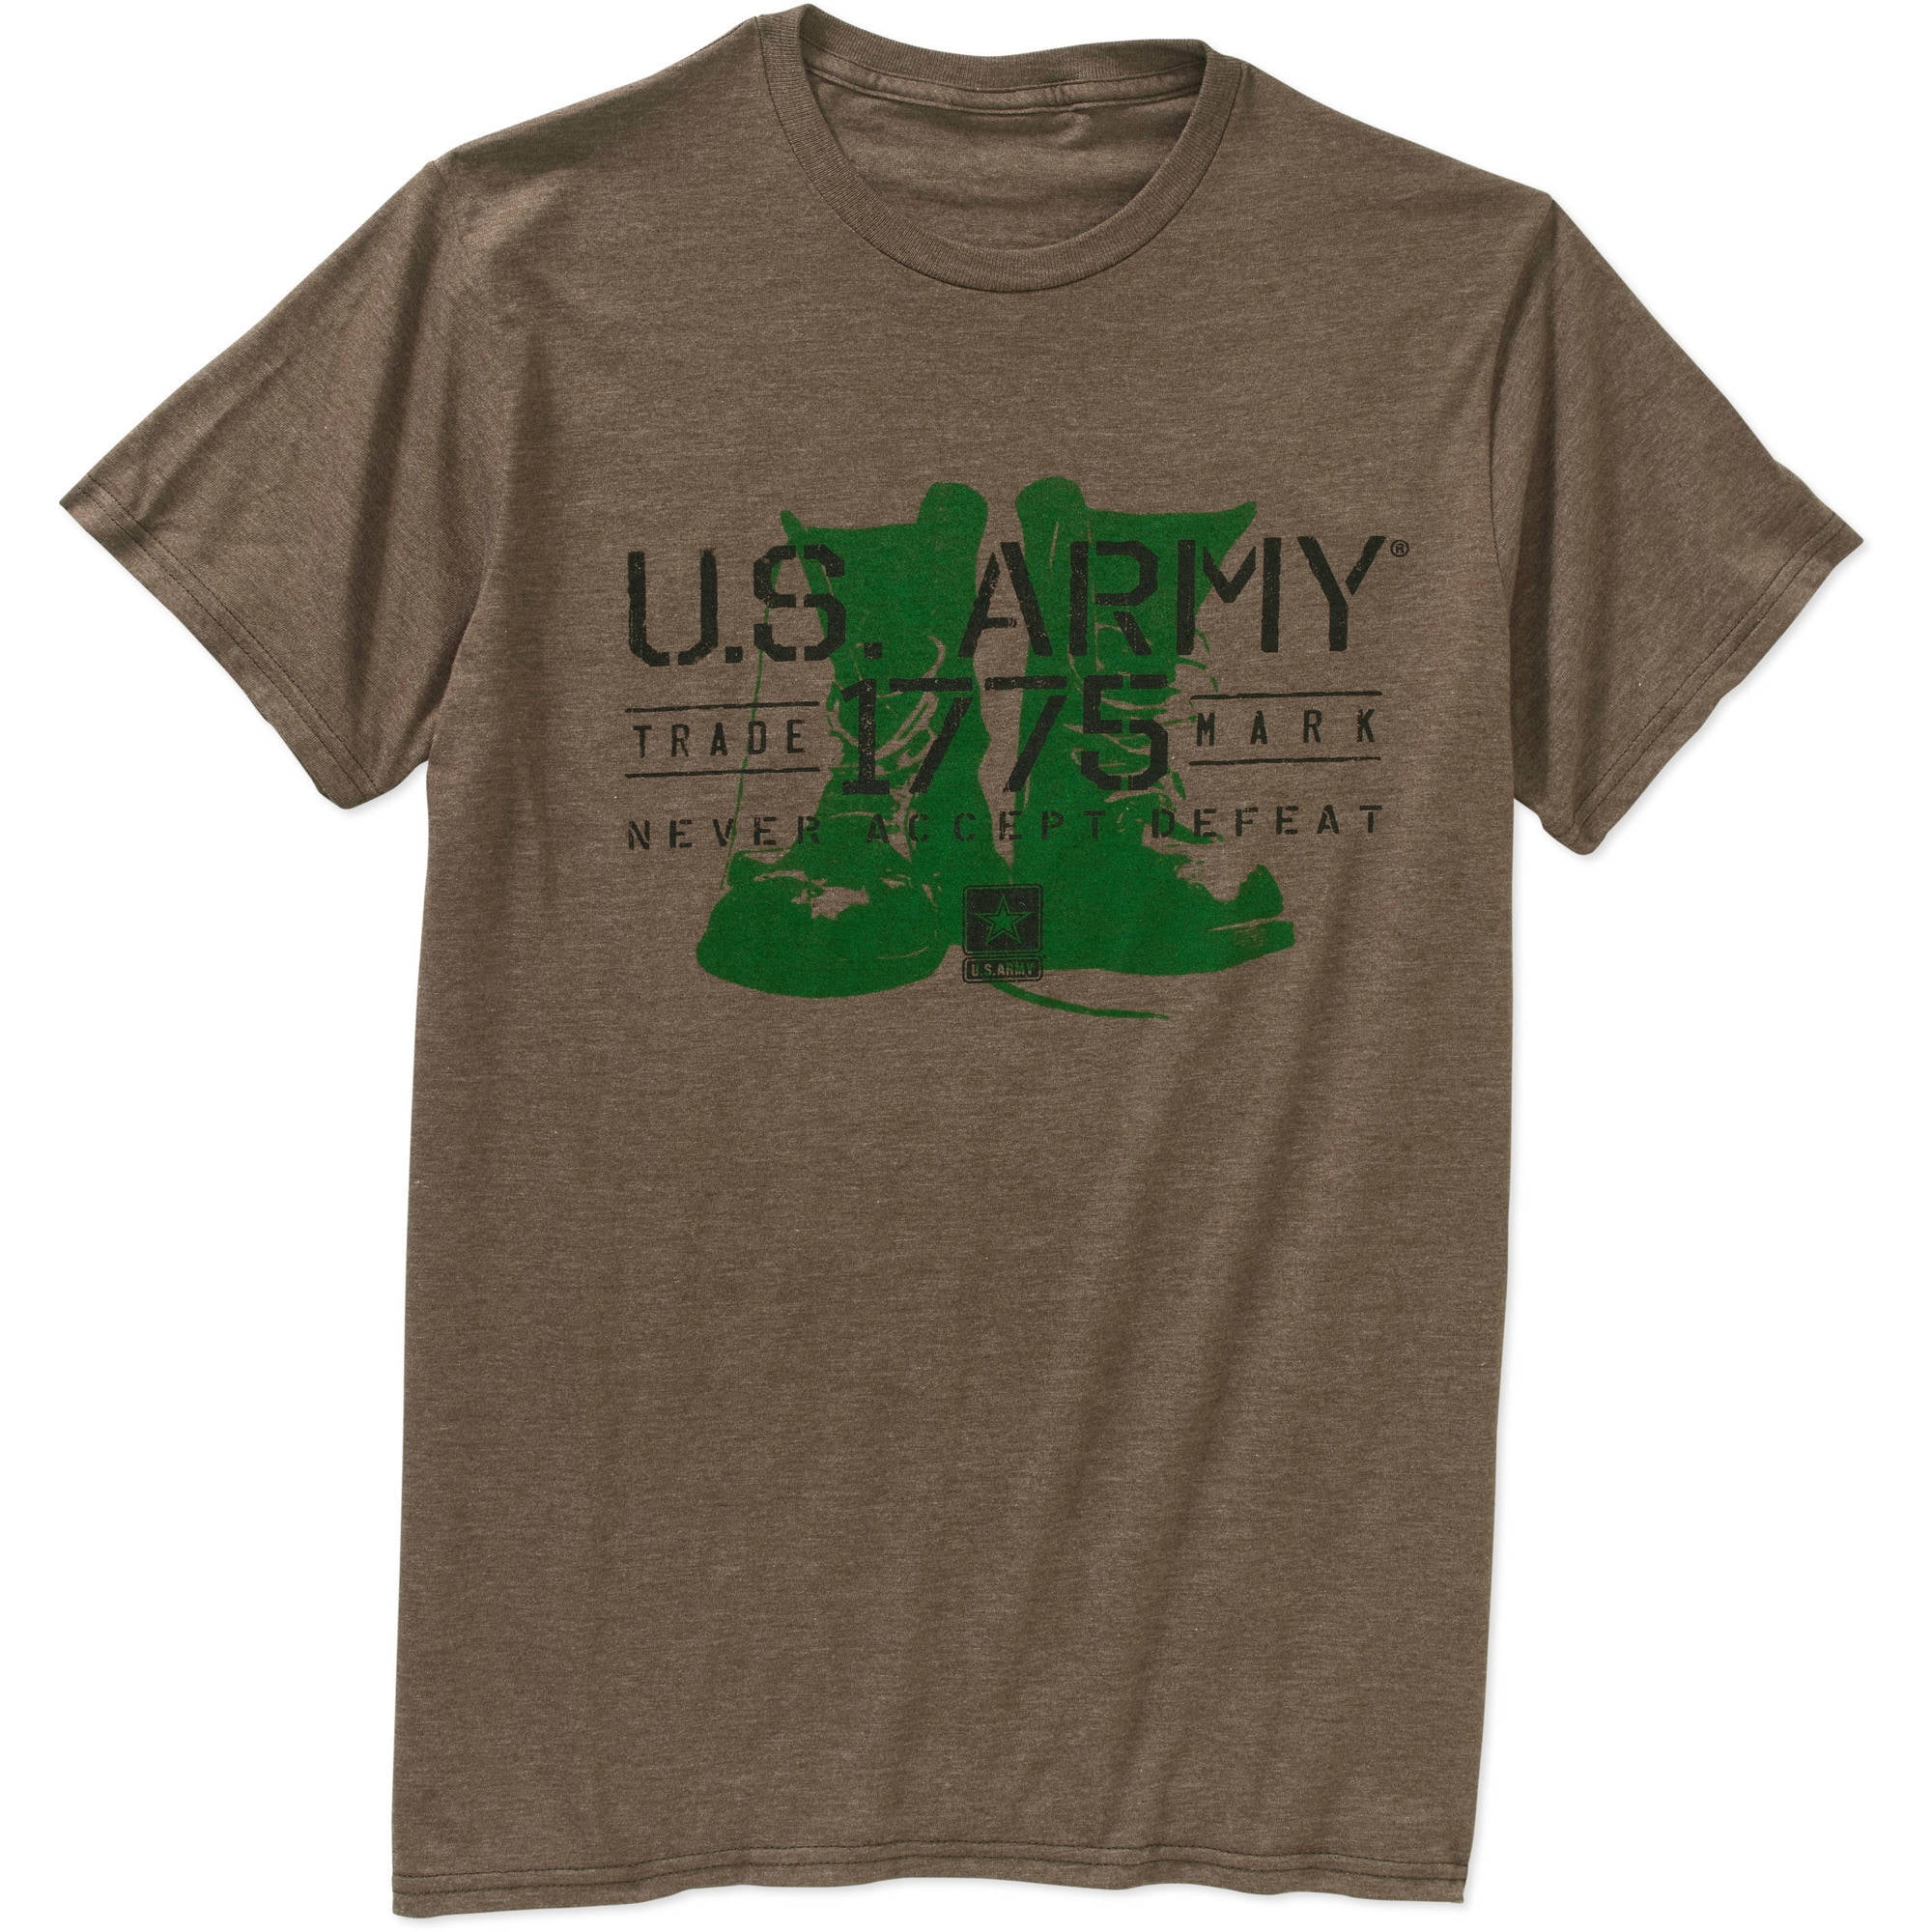 Army - Men's Military Officially Licensed Honor & Commitment Tee, 2XL ...